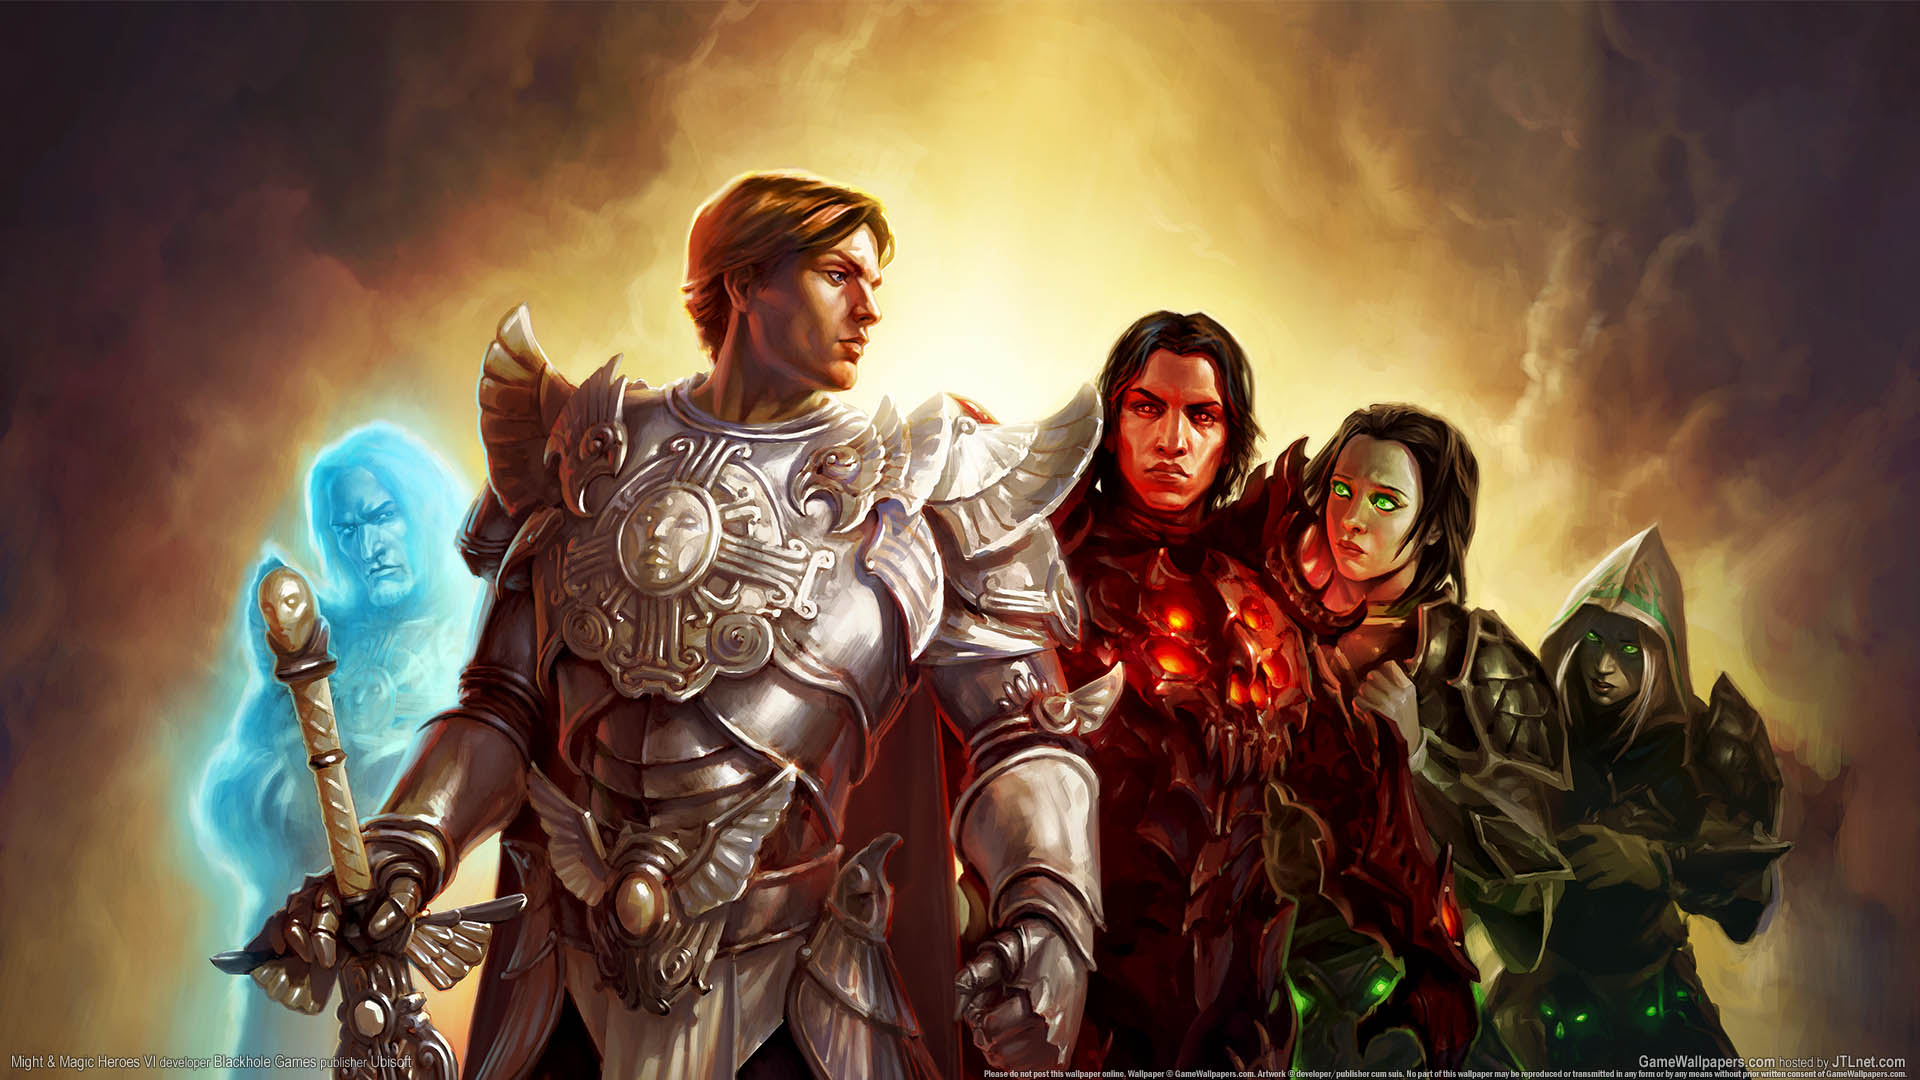 Might & Magic Heroes 6 achtergrond 02 1920x1080